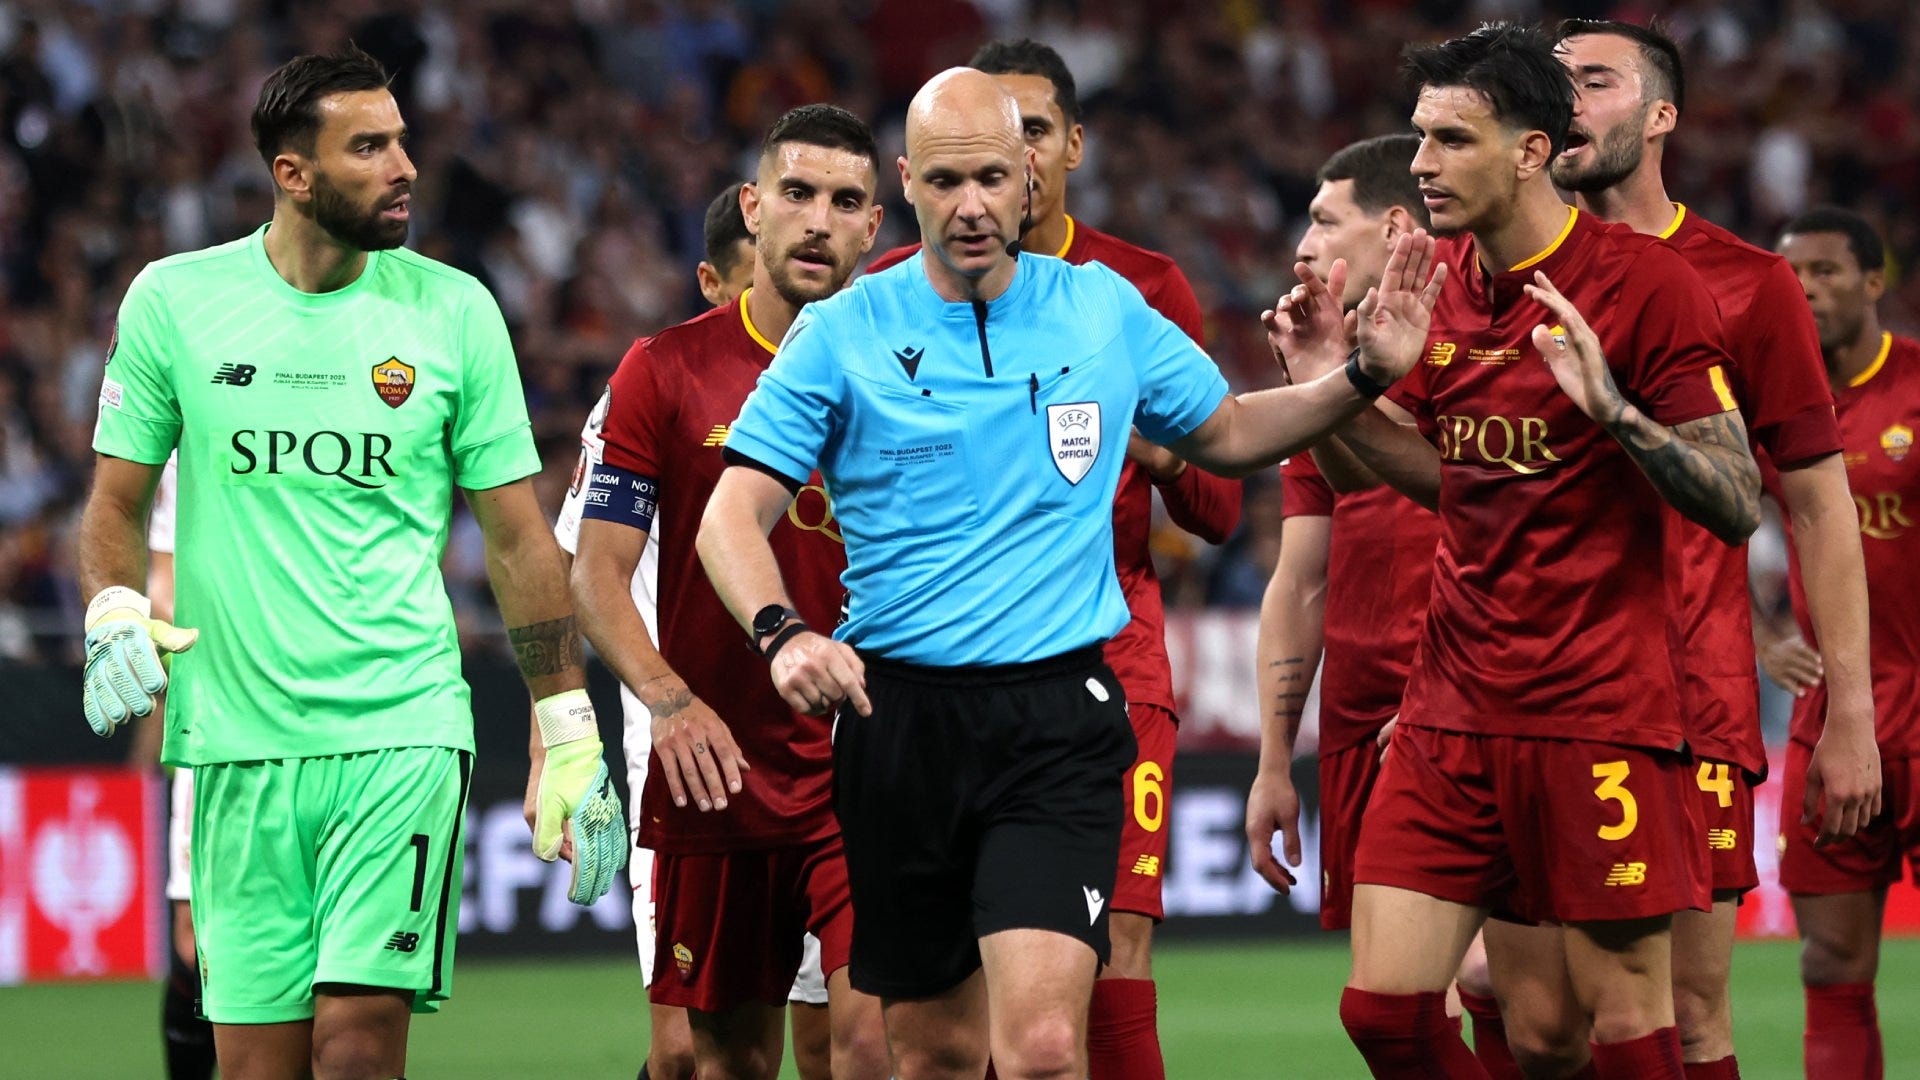 uefa-to-review-security-measures-after-referee-anthony-taylor-is-attacked-at-airport-following-jose-mourinho-europa-league-final-abuse-or-goal-com-india